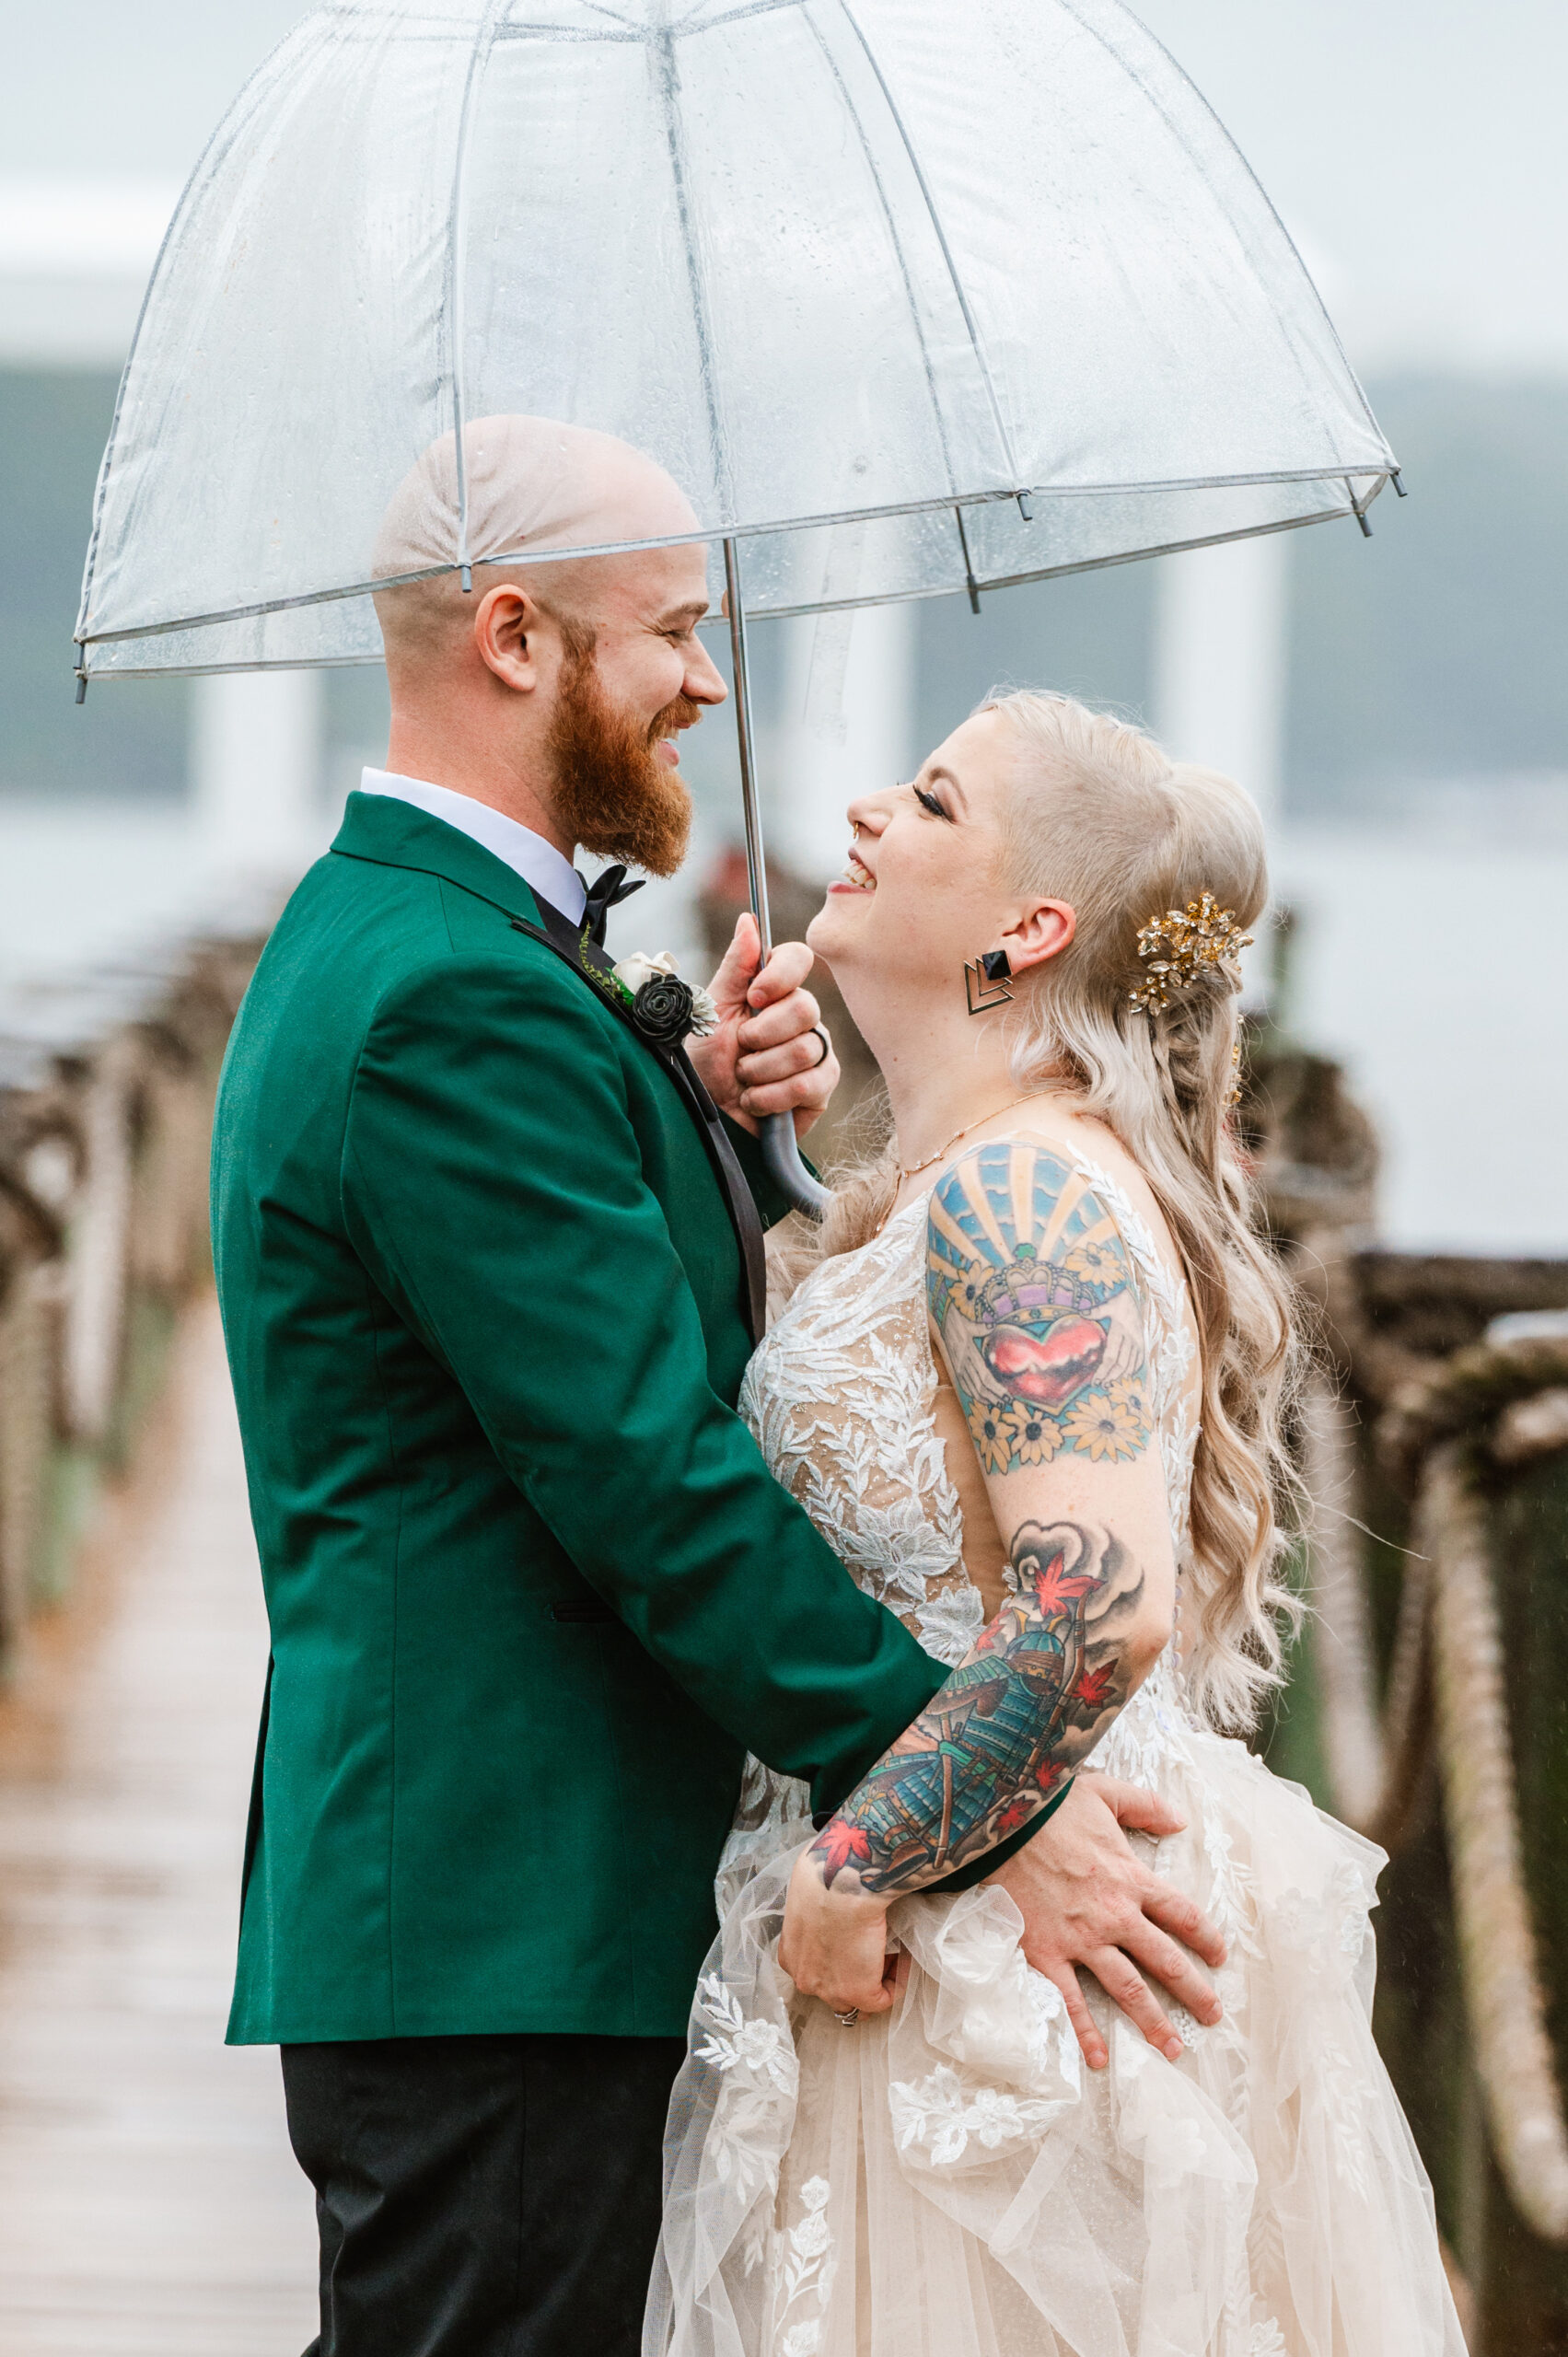 bride with colorful tattoos and groom with beard hug and smile under clear umbrella